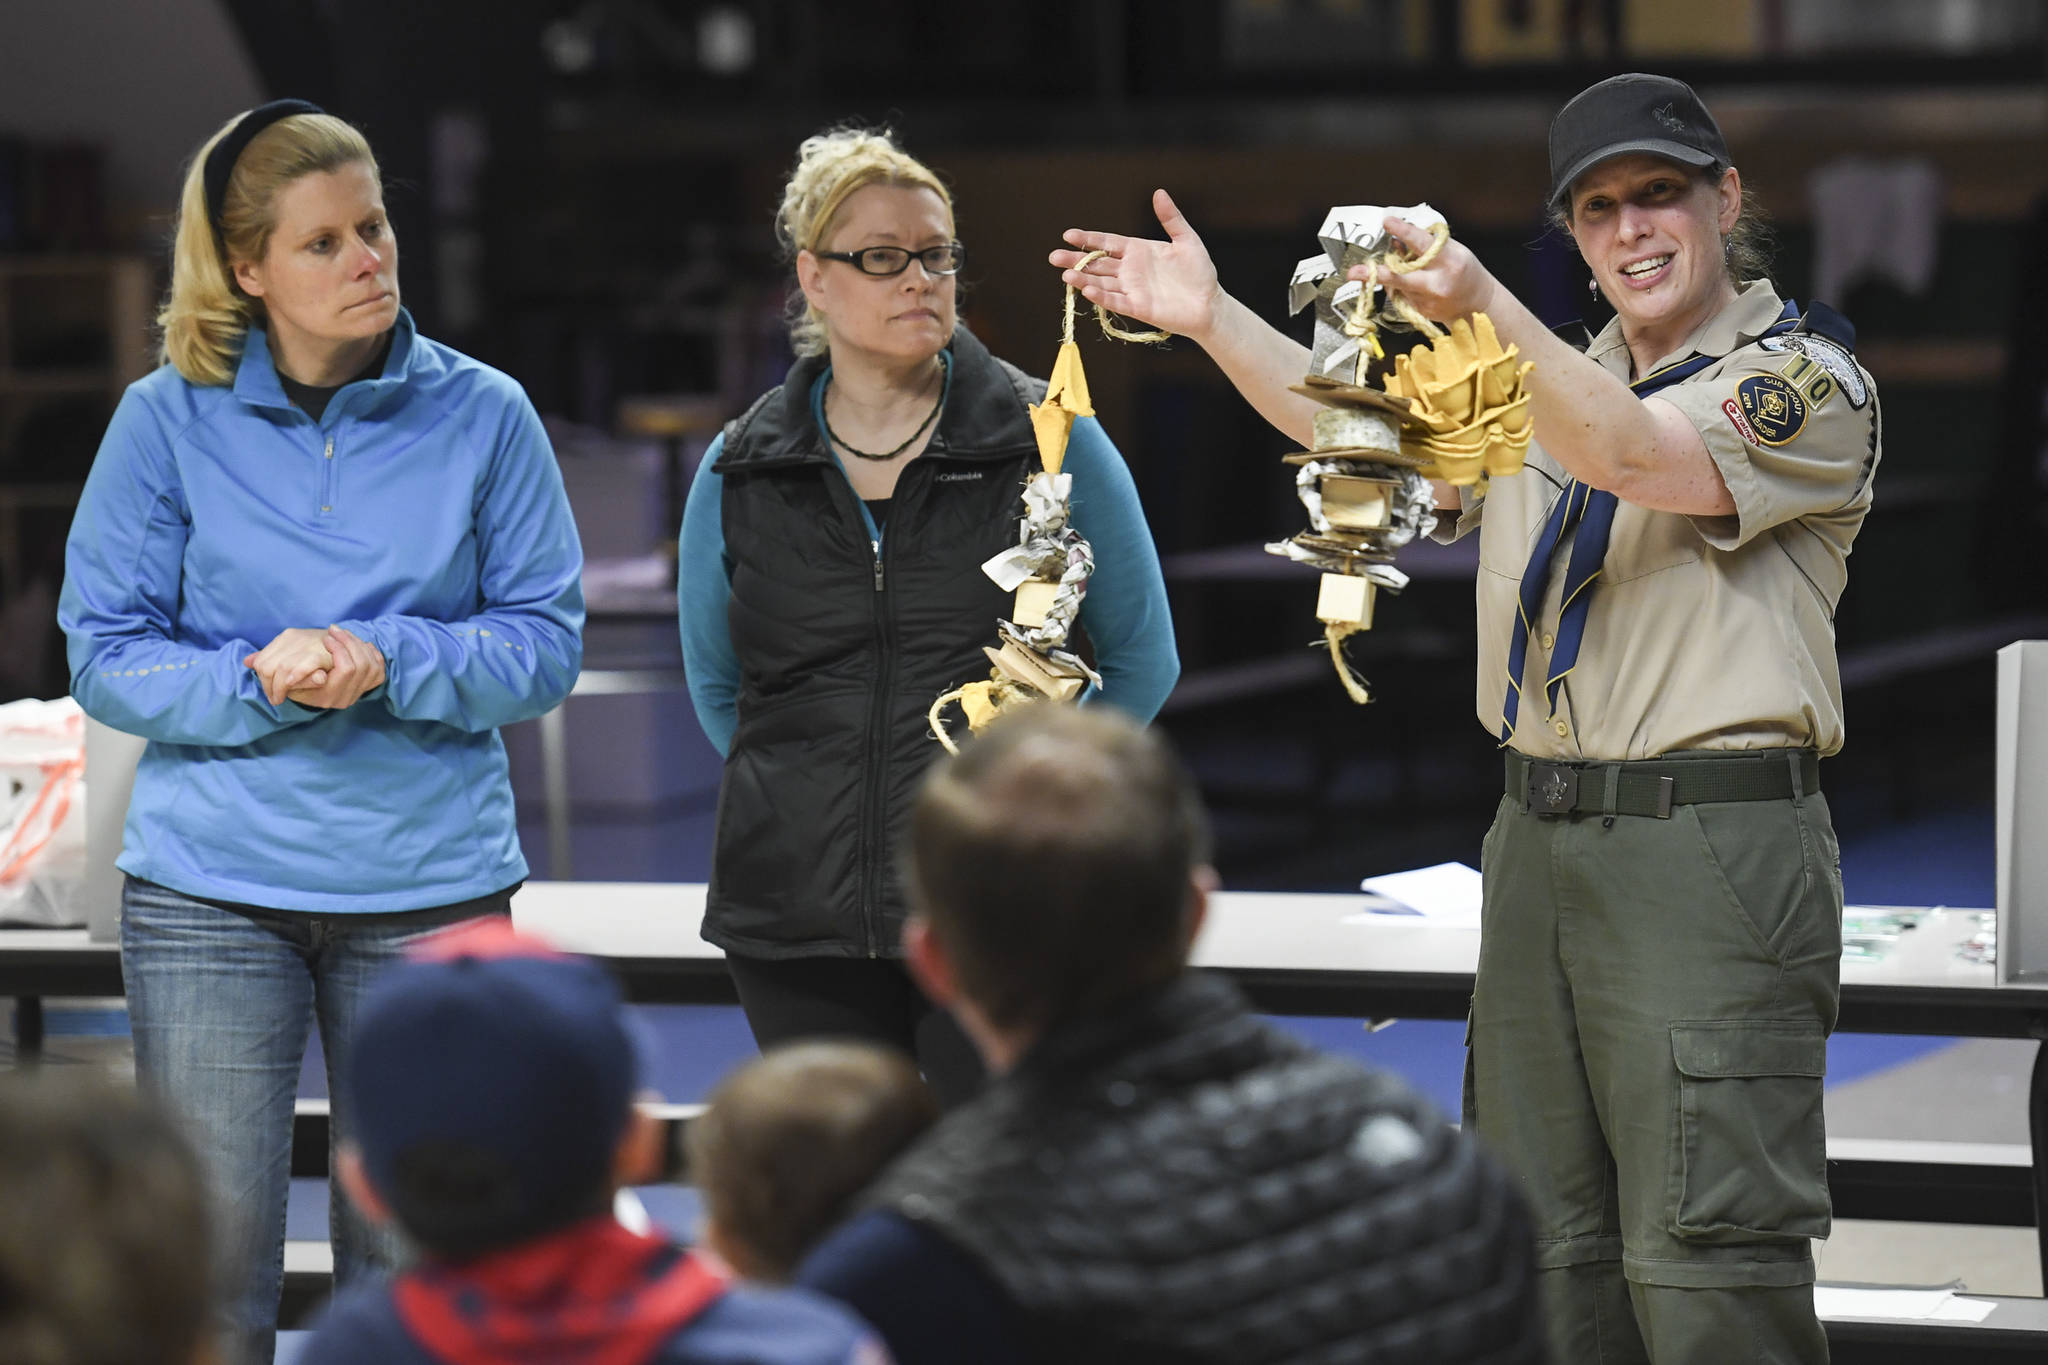 Bear Den Leader Shannon Seifert holds up examples enrichment toys for birds during a cub scout pack meeting at Harborview Elementary School on Friday, Nov. 22, 2019. About 25 cub scouts constructed the toys as a service project for the Juneau Raptor Center. (Michael Penn | Juneau Empire)